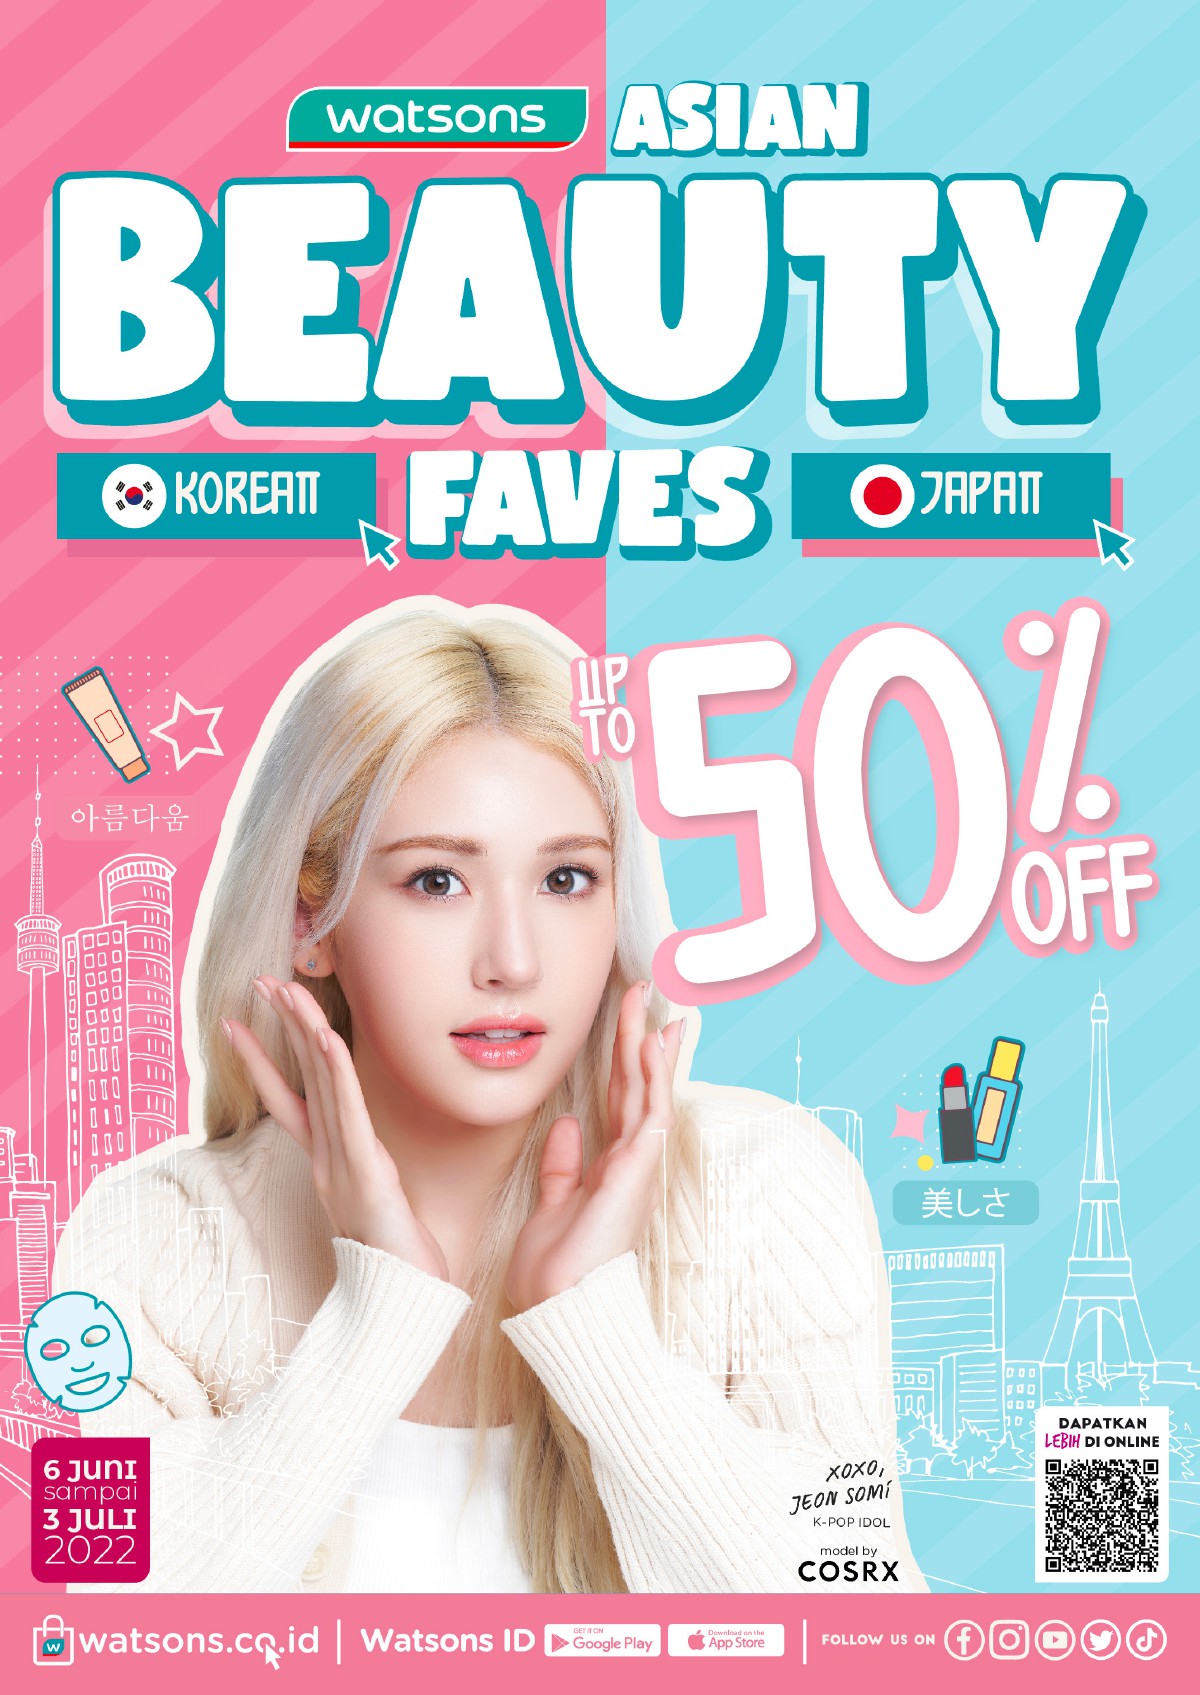 Katalog Belanja Watsons Terbaru - Asian Beauty Faves | Discount Up to 50% on your favorite products